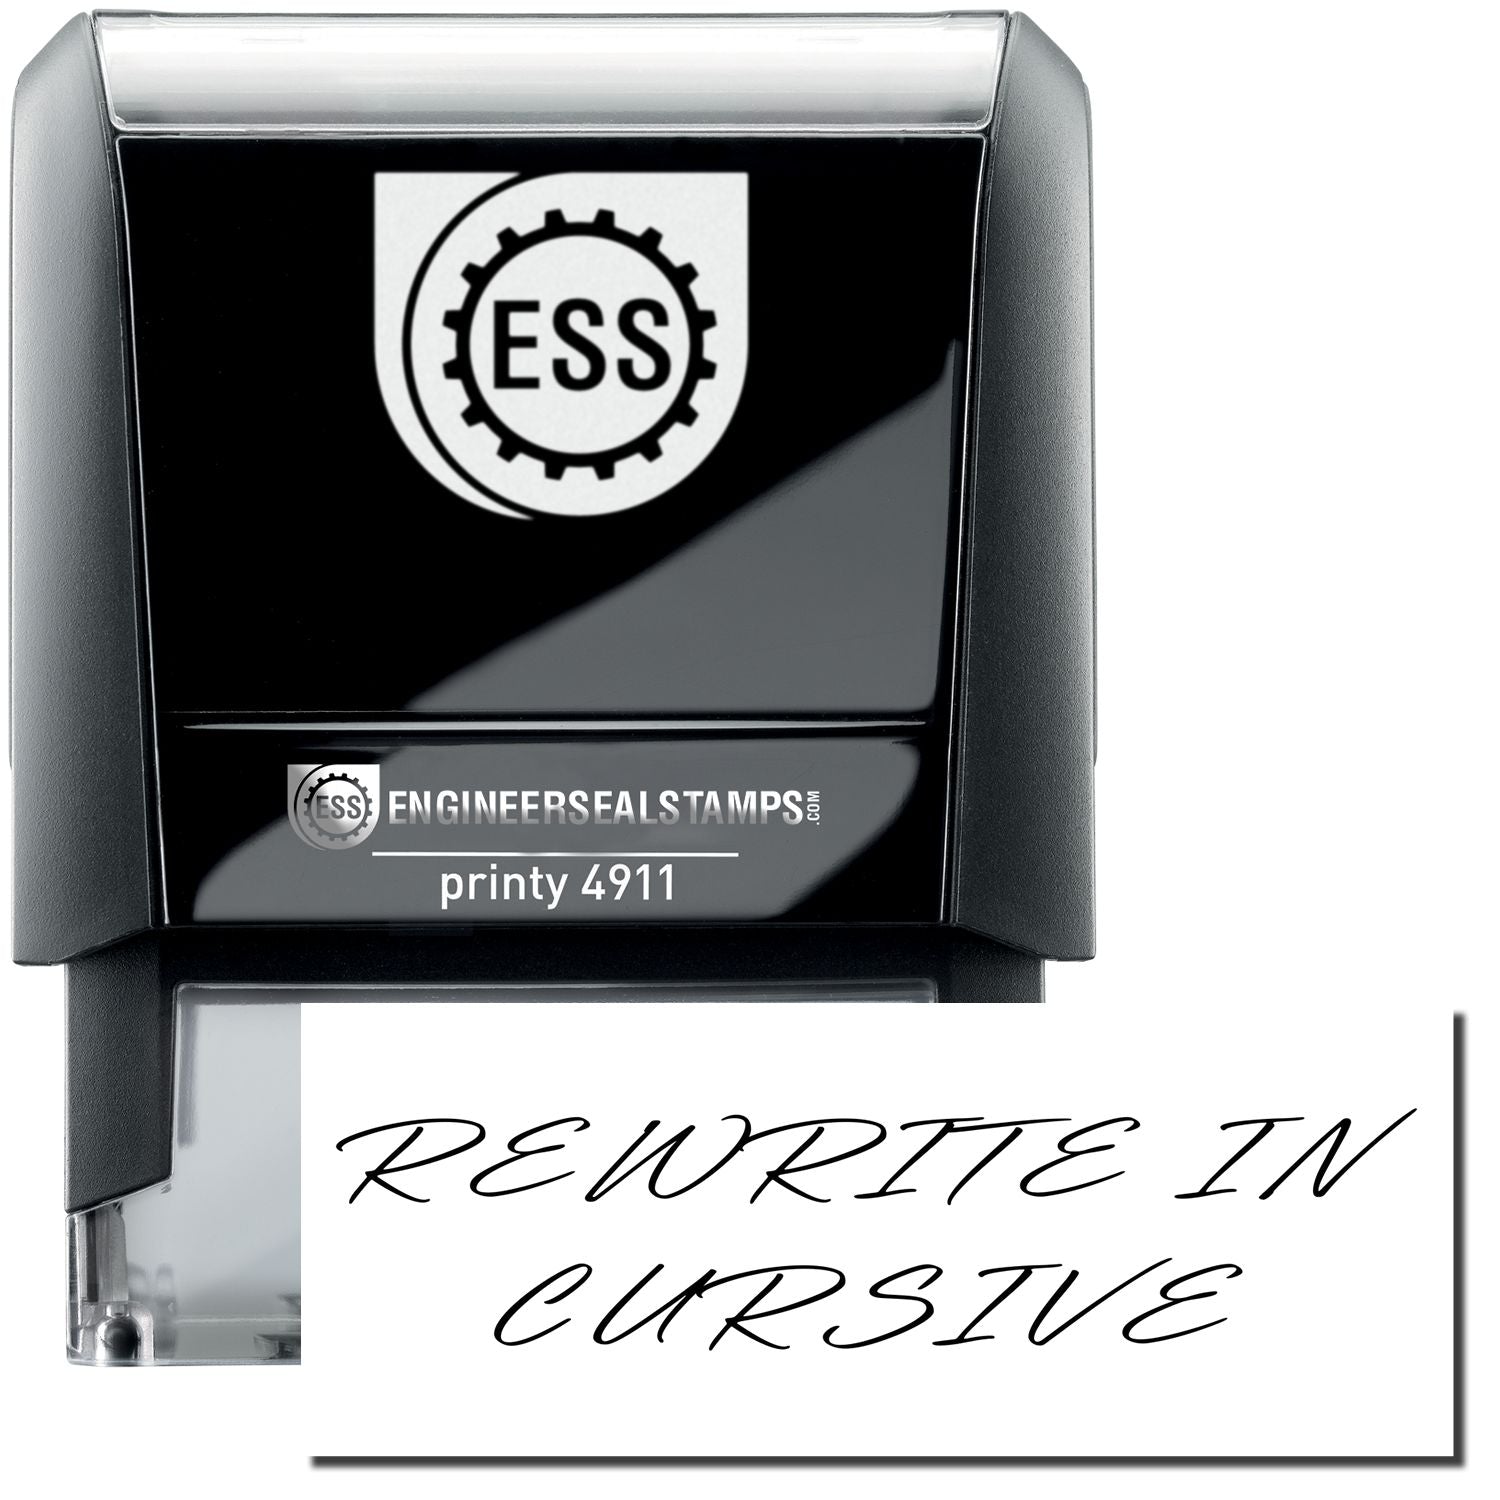 A self-inking stamp with a stamped image showing how the text "REWRITE IN CURSIVE" is displayed after stamping.